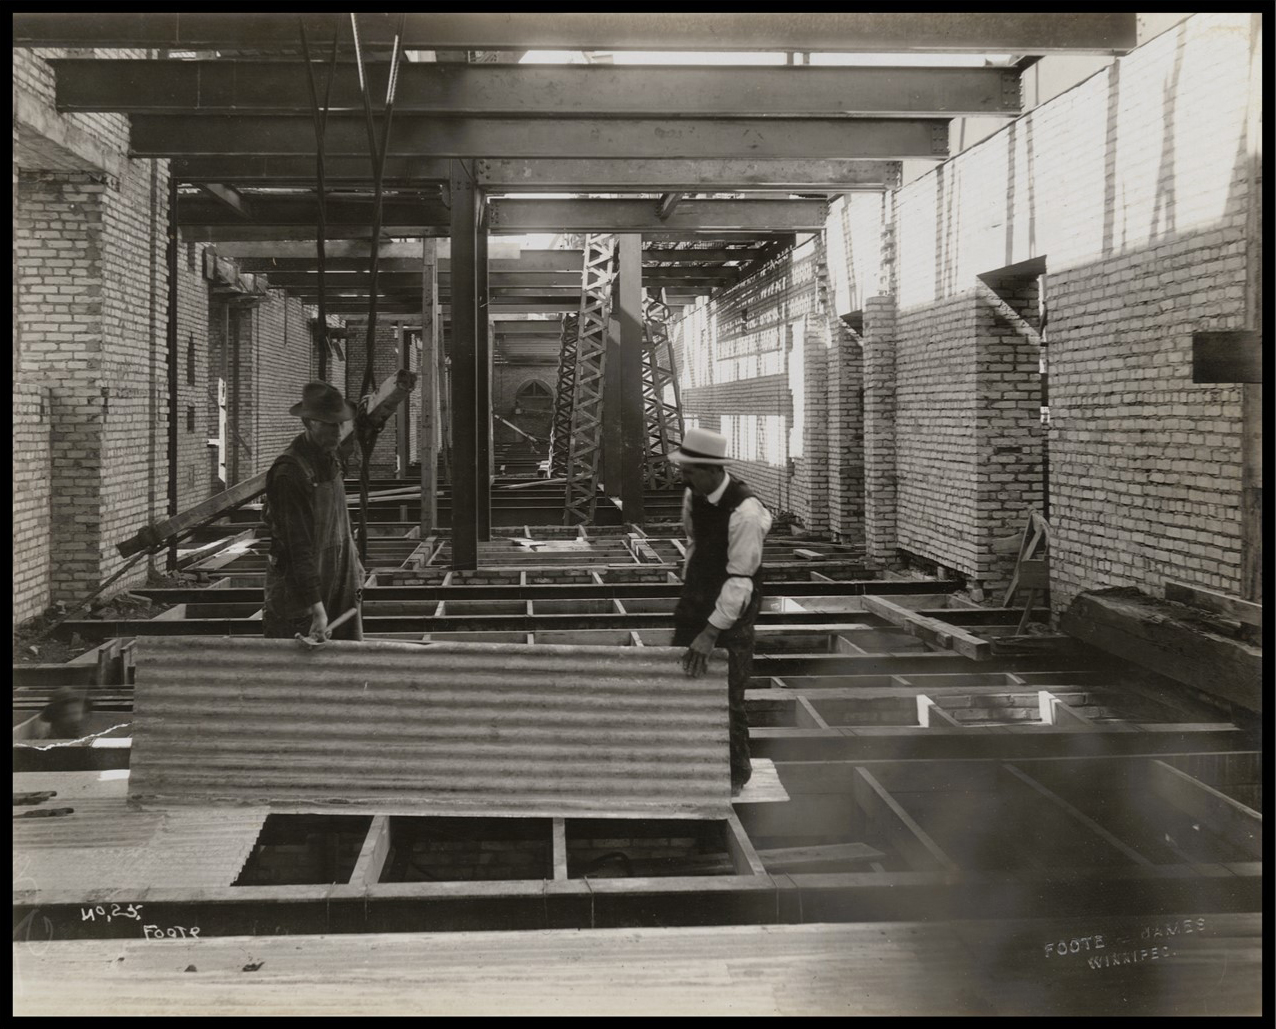 Photo of the interior of the building. The walls are complete, but the floors are still wood frames. Steel beams are exposed on the ceiling. Two men carry a large sheet to lay on the floor on top of the wood frames.